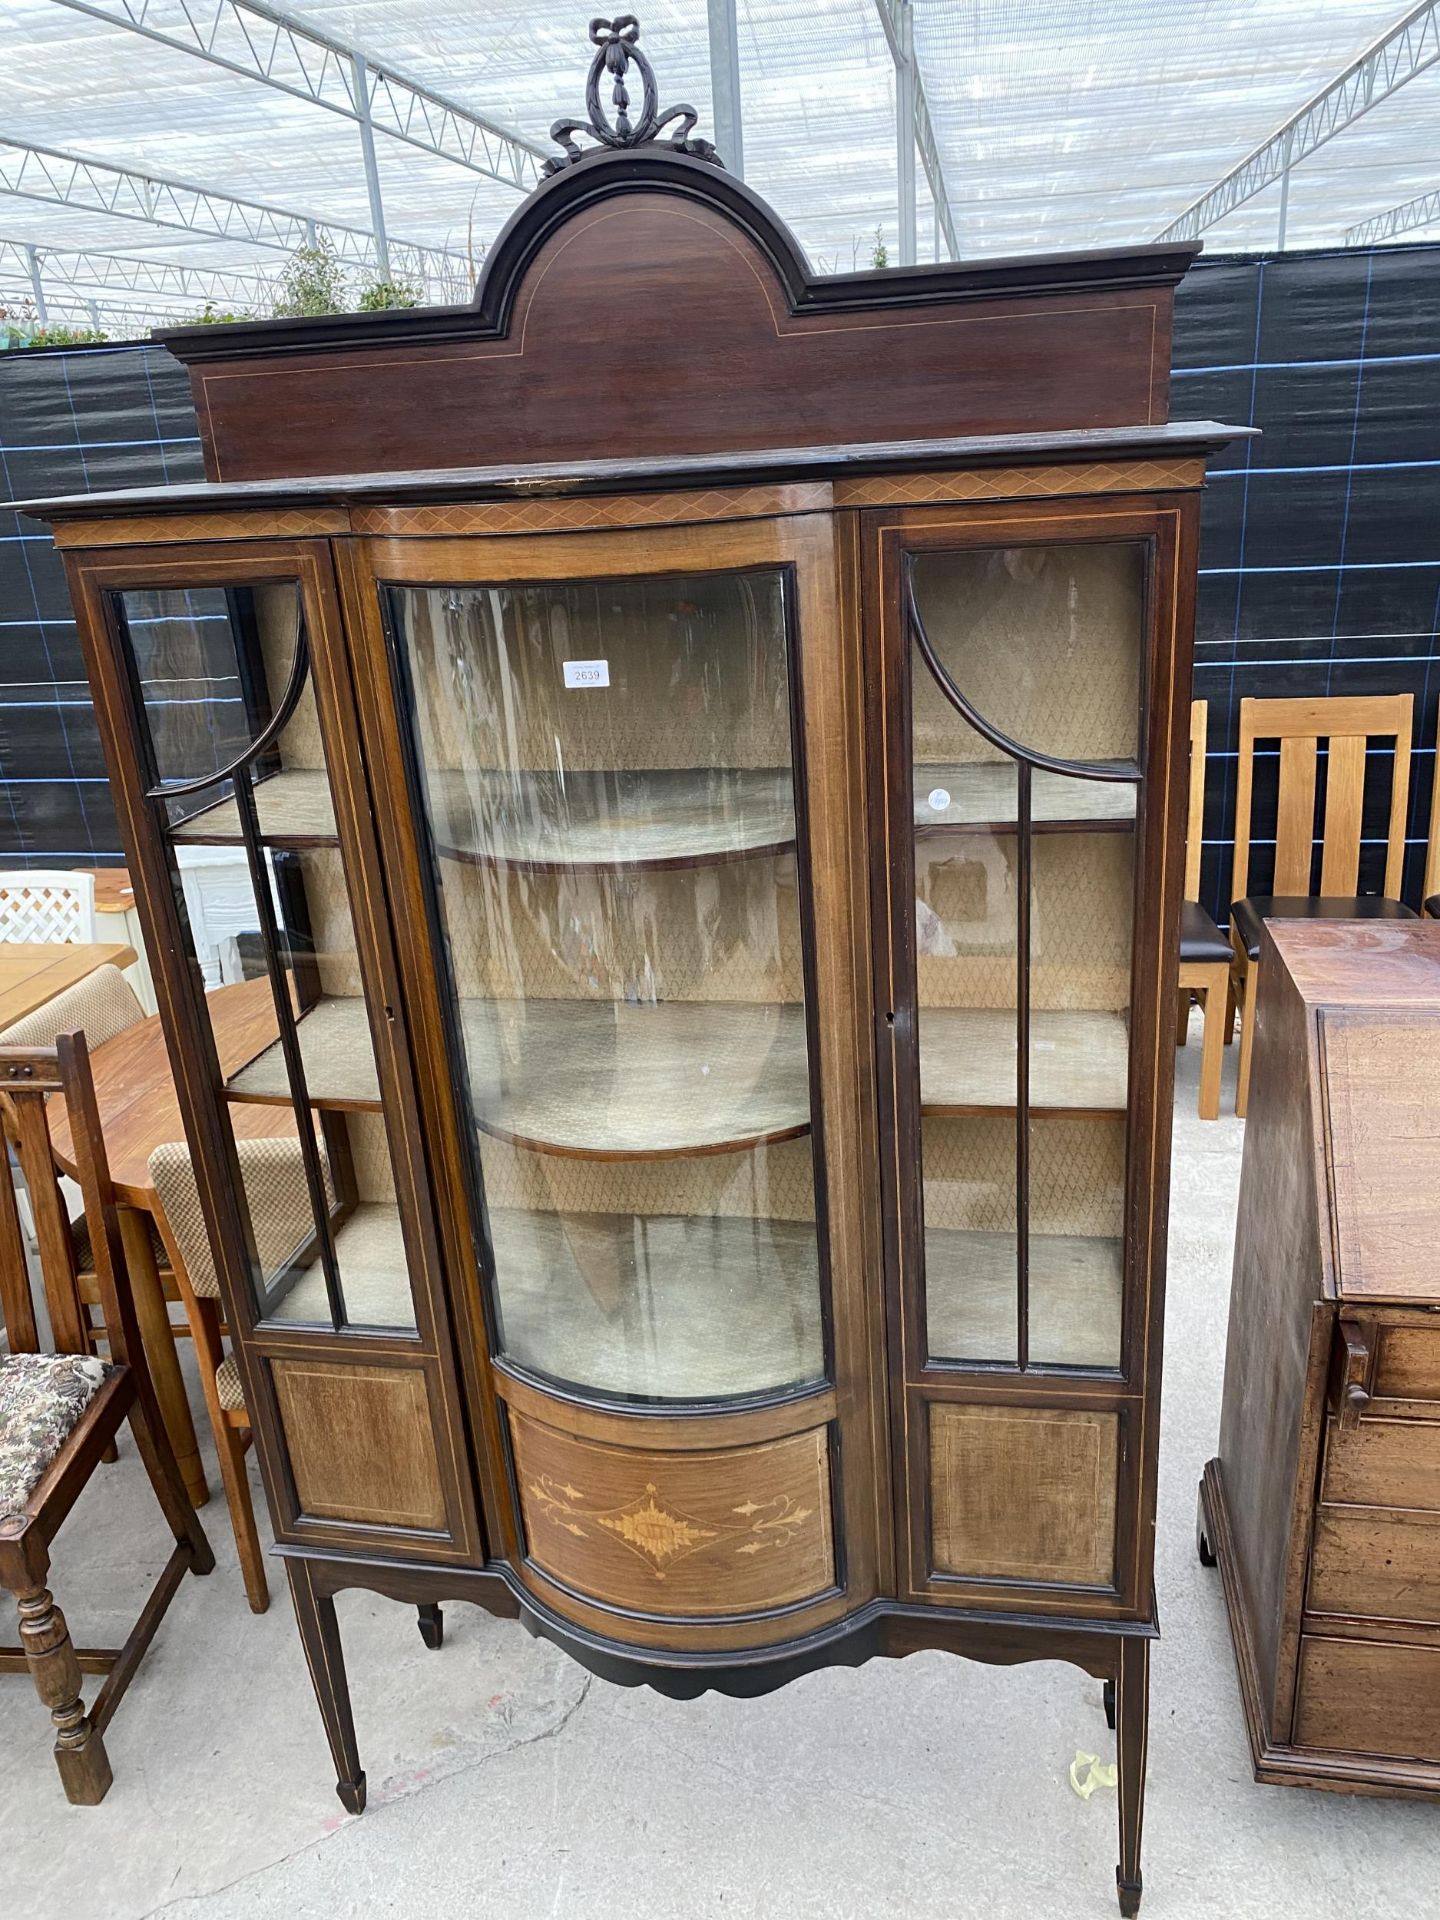 AN EDWARDIAN MAHOGANY AND INLAID BOWFRONTED CHINA DISPLAY CABINET ON TAPERED LEGS, WITH SPADE